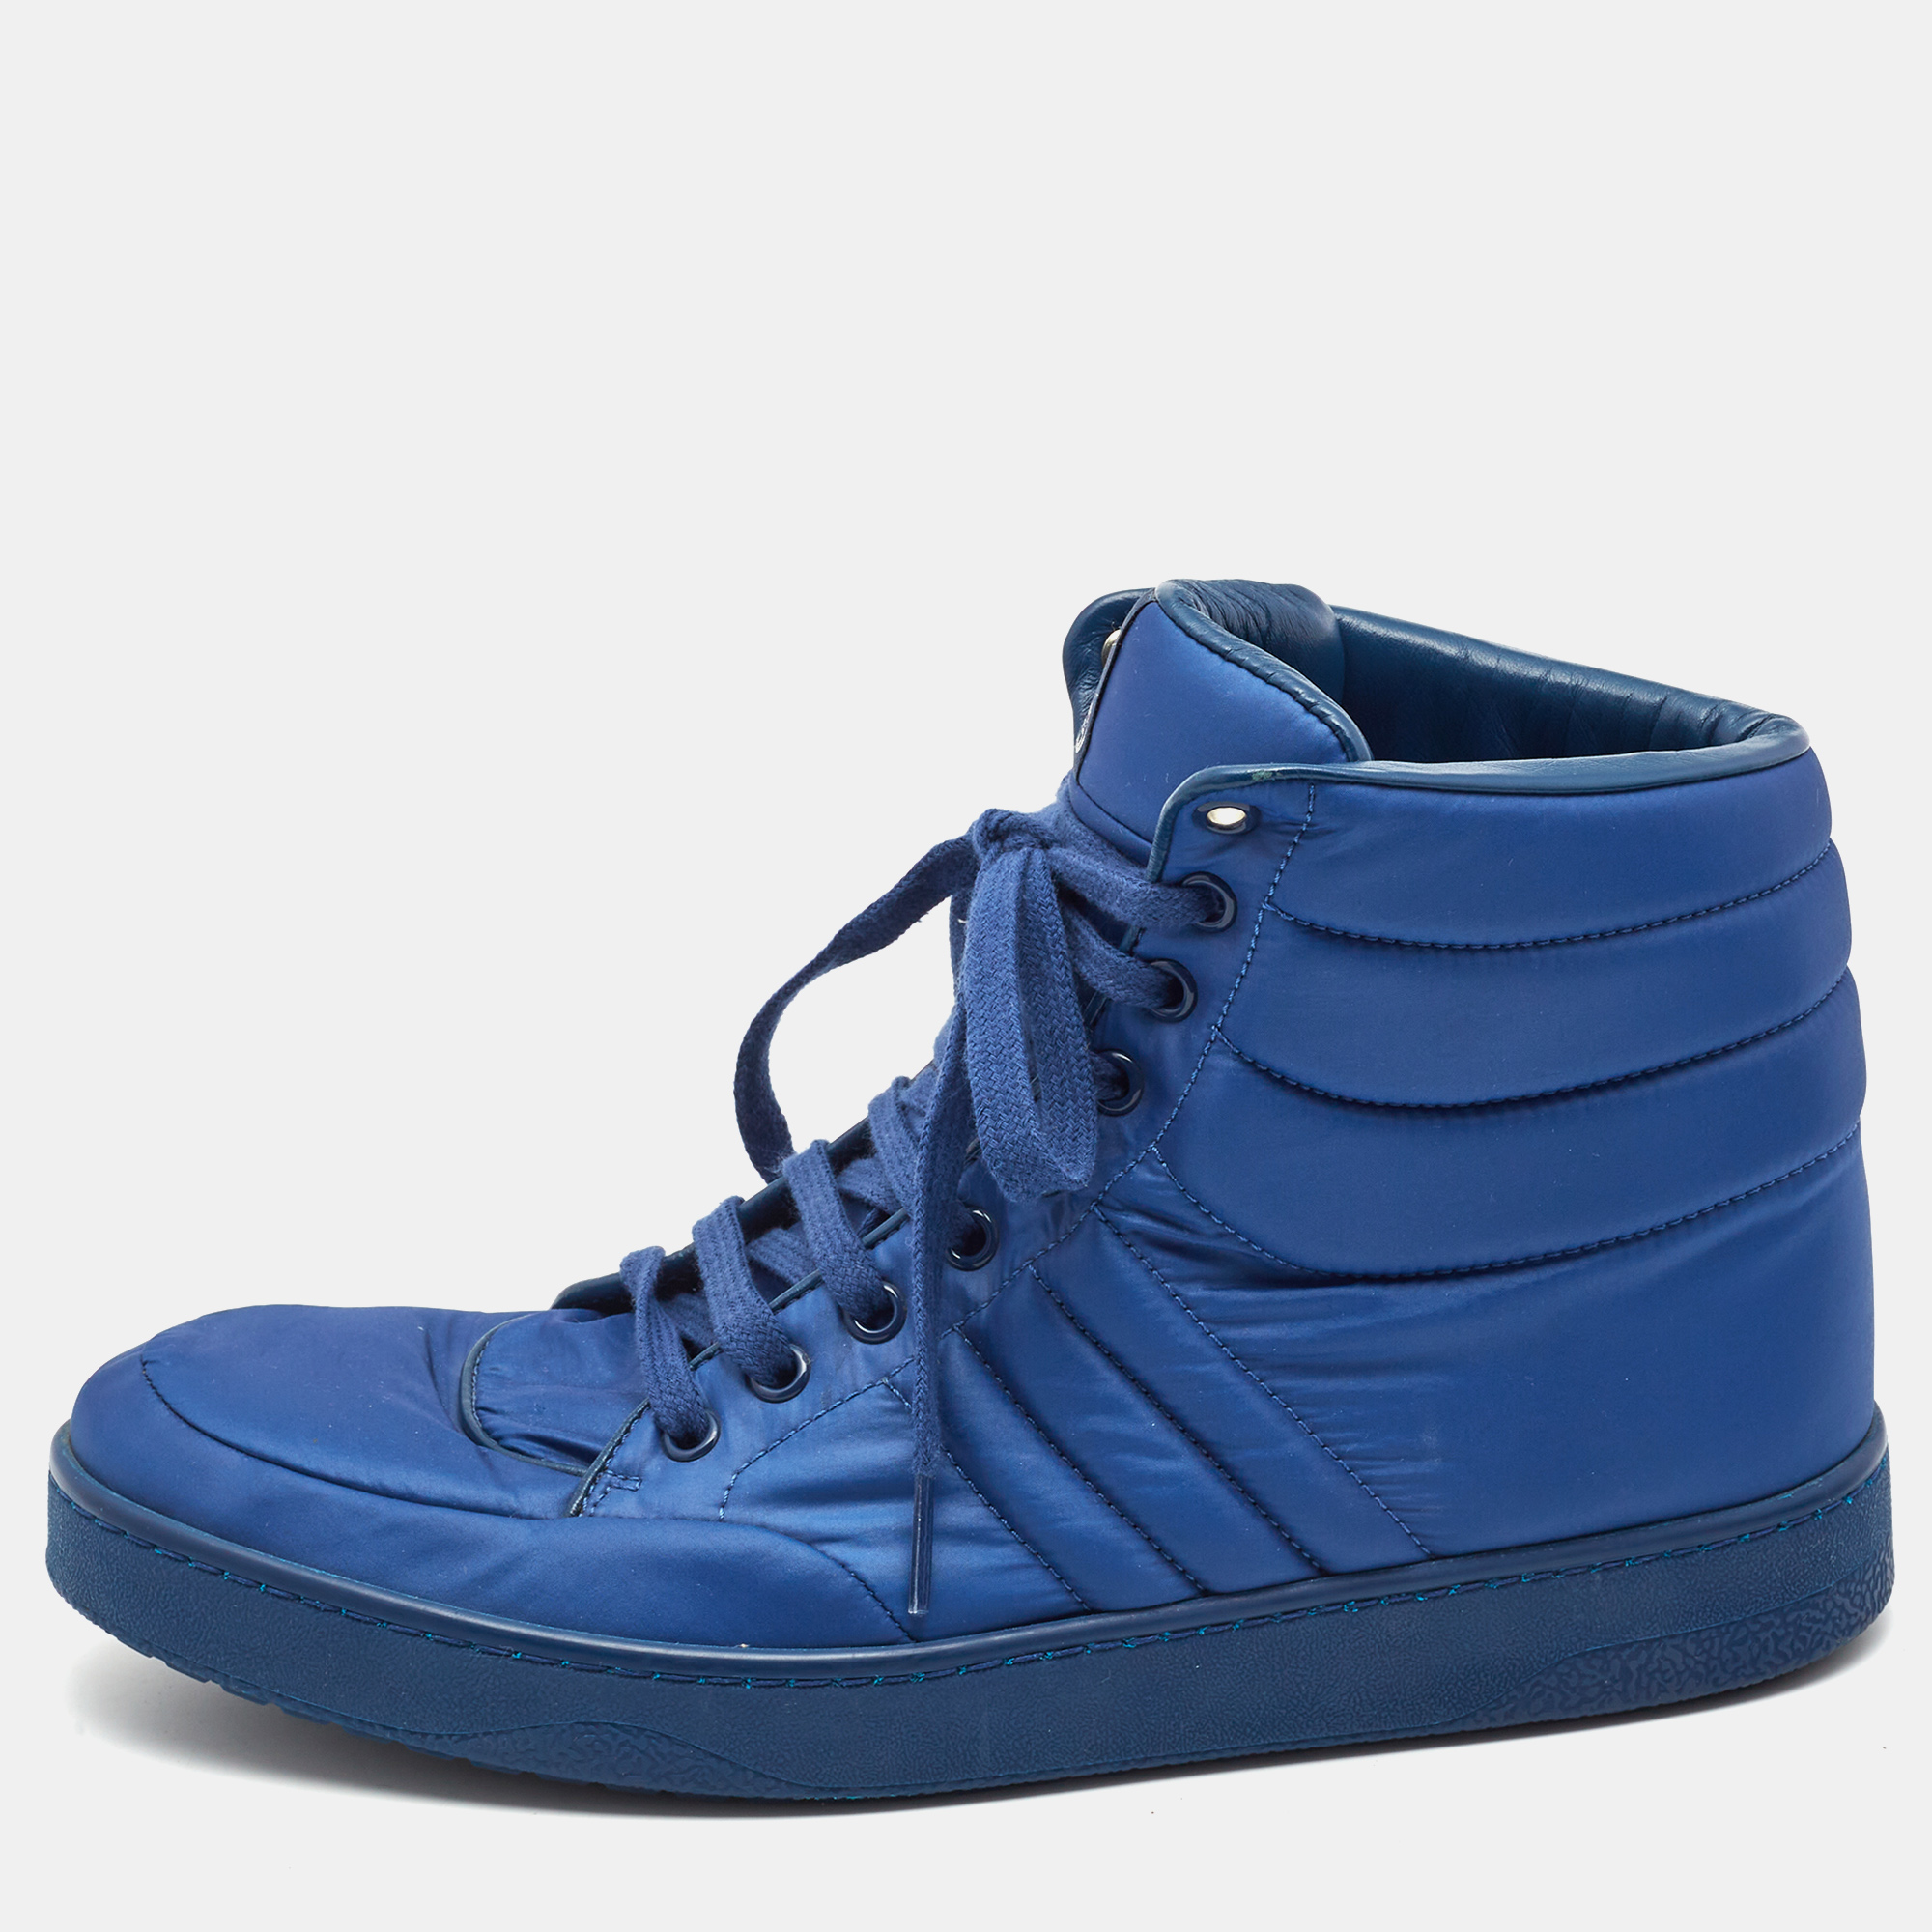 Pre-owned Gucci Blue Nylon Coda High Top Sneakers Size 41.5